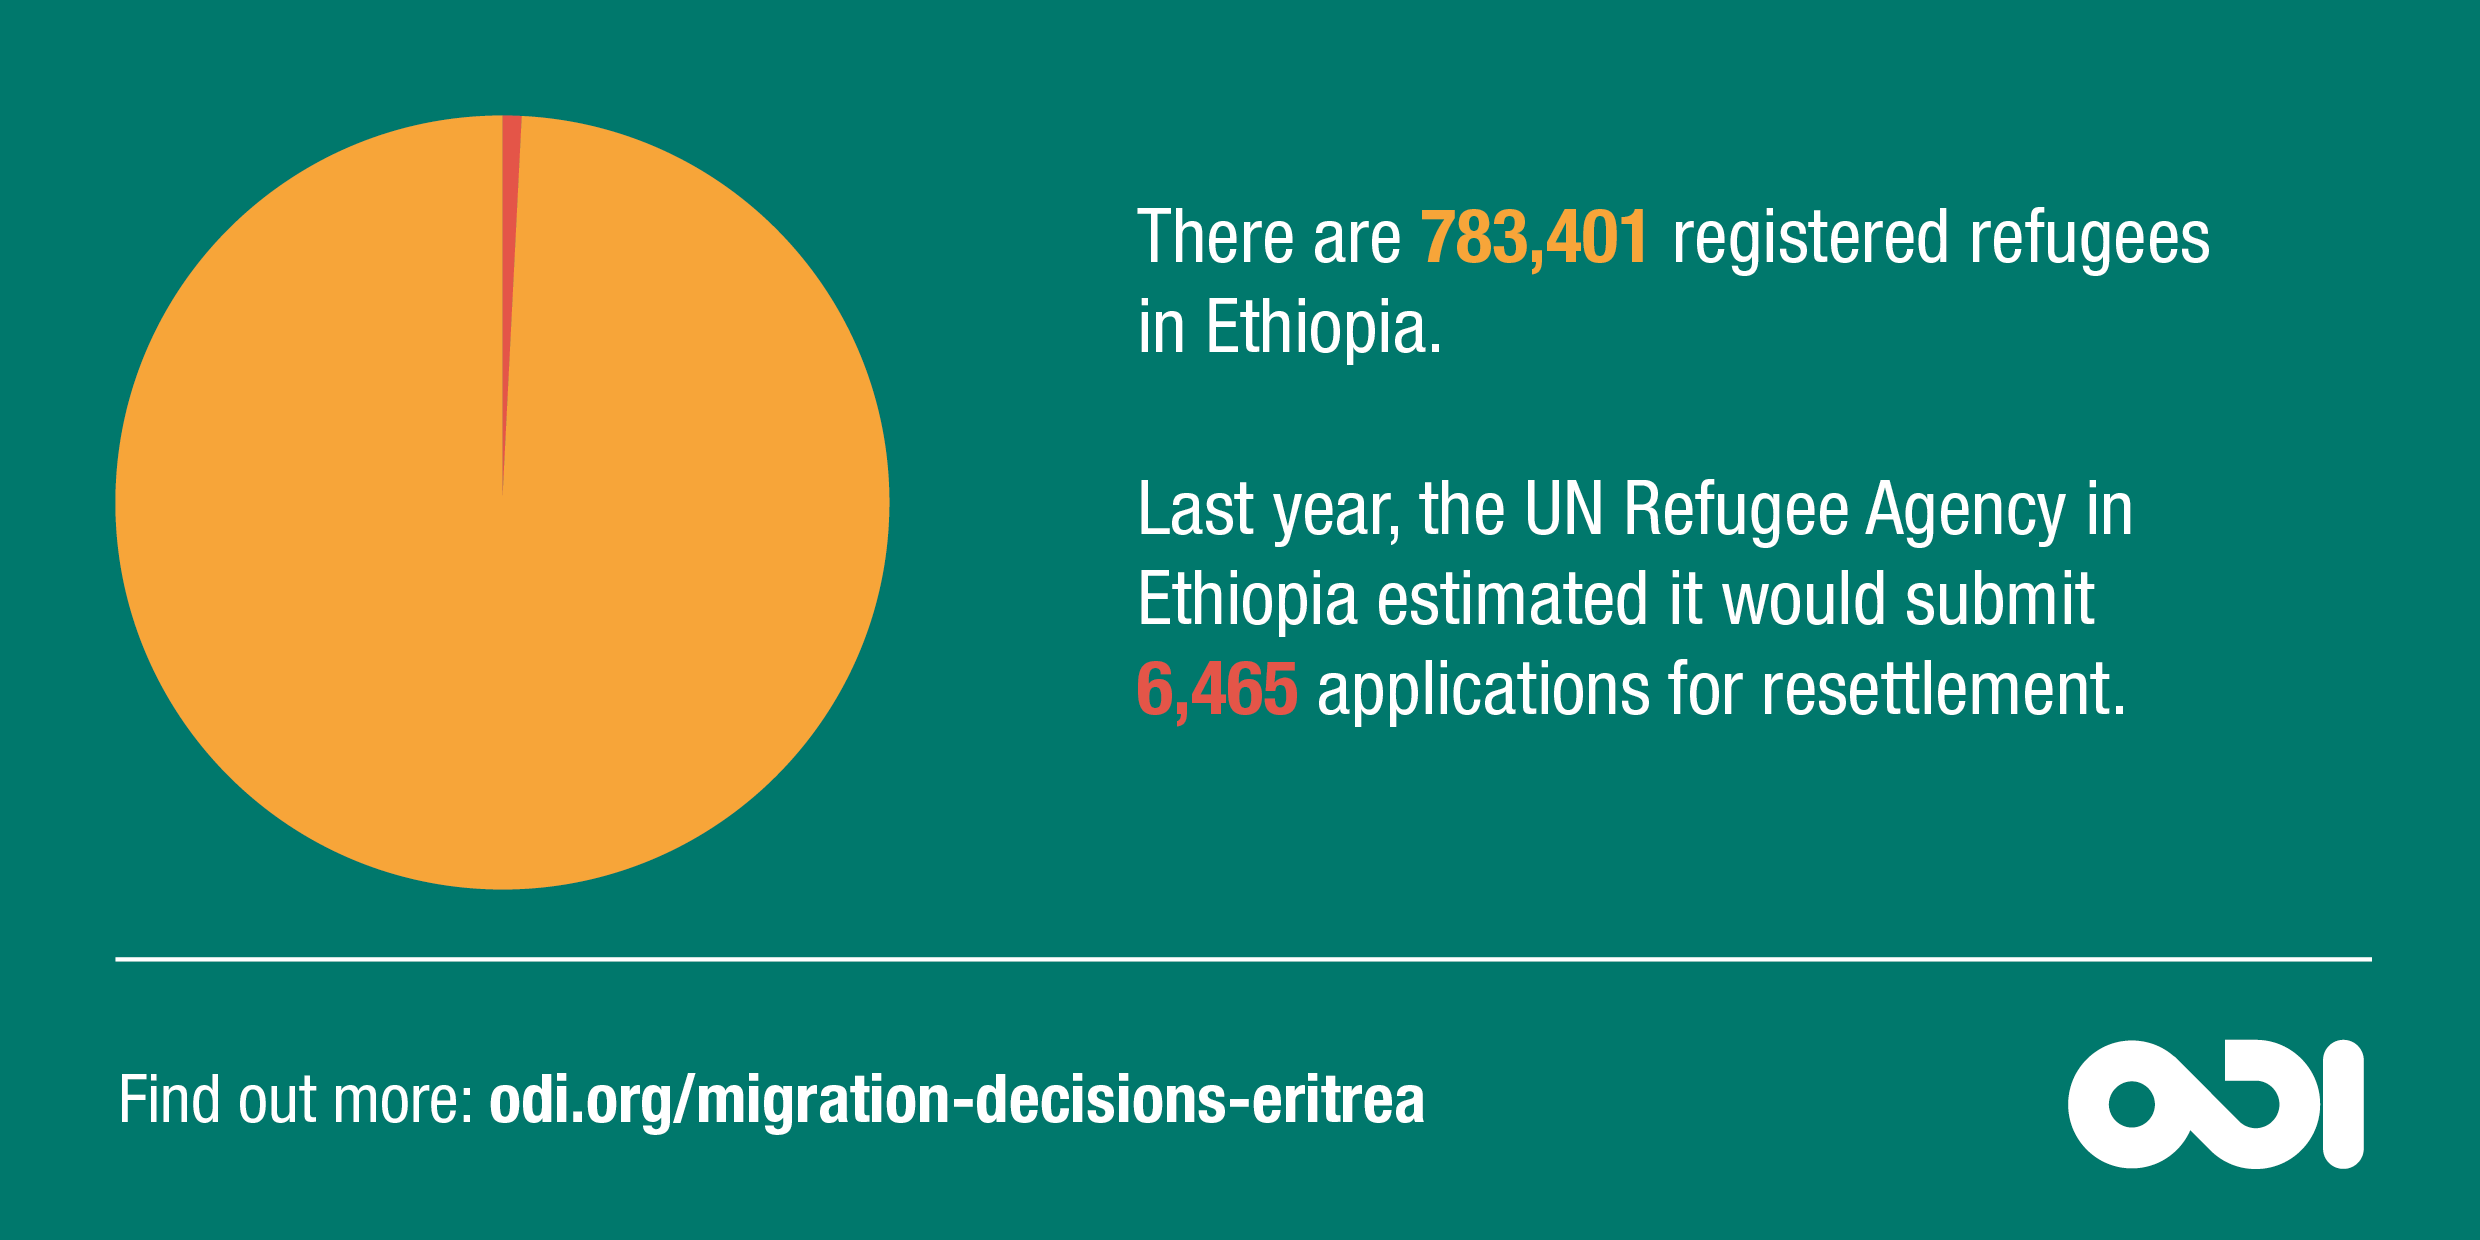 Infographic: only 0.8% of the nearly 800,000 refugees in Ethiopia were submitted for resettlement last year